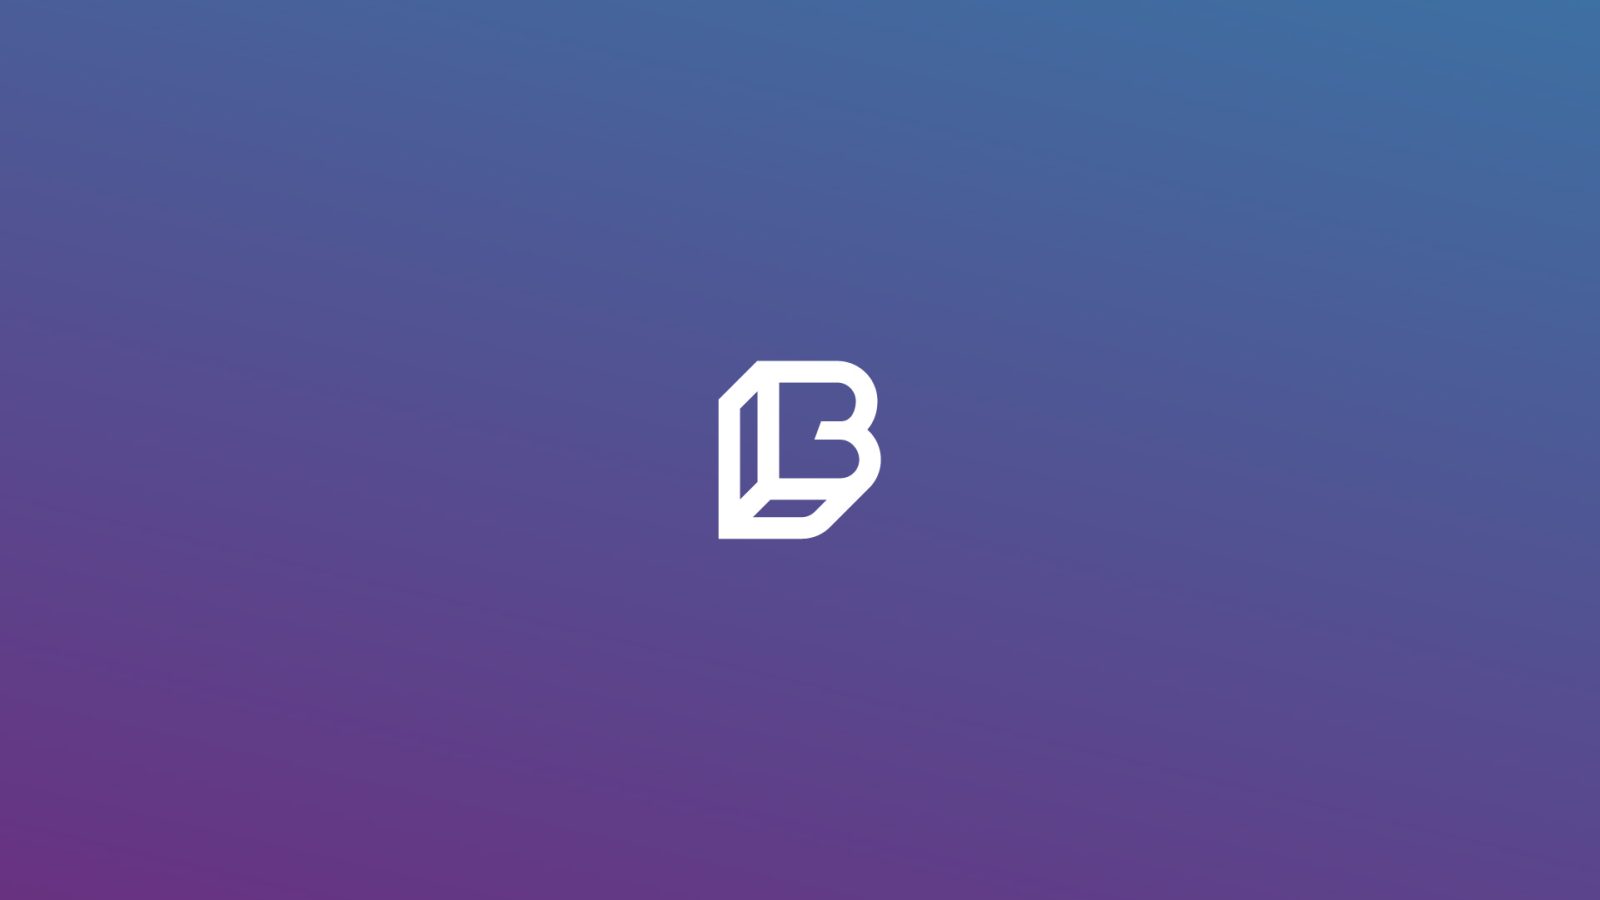 Gradient background transitioning from blue to purple with a white logo in the center resembling a stylized letter 